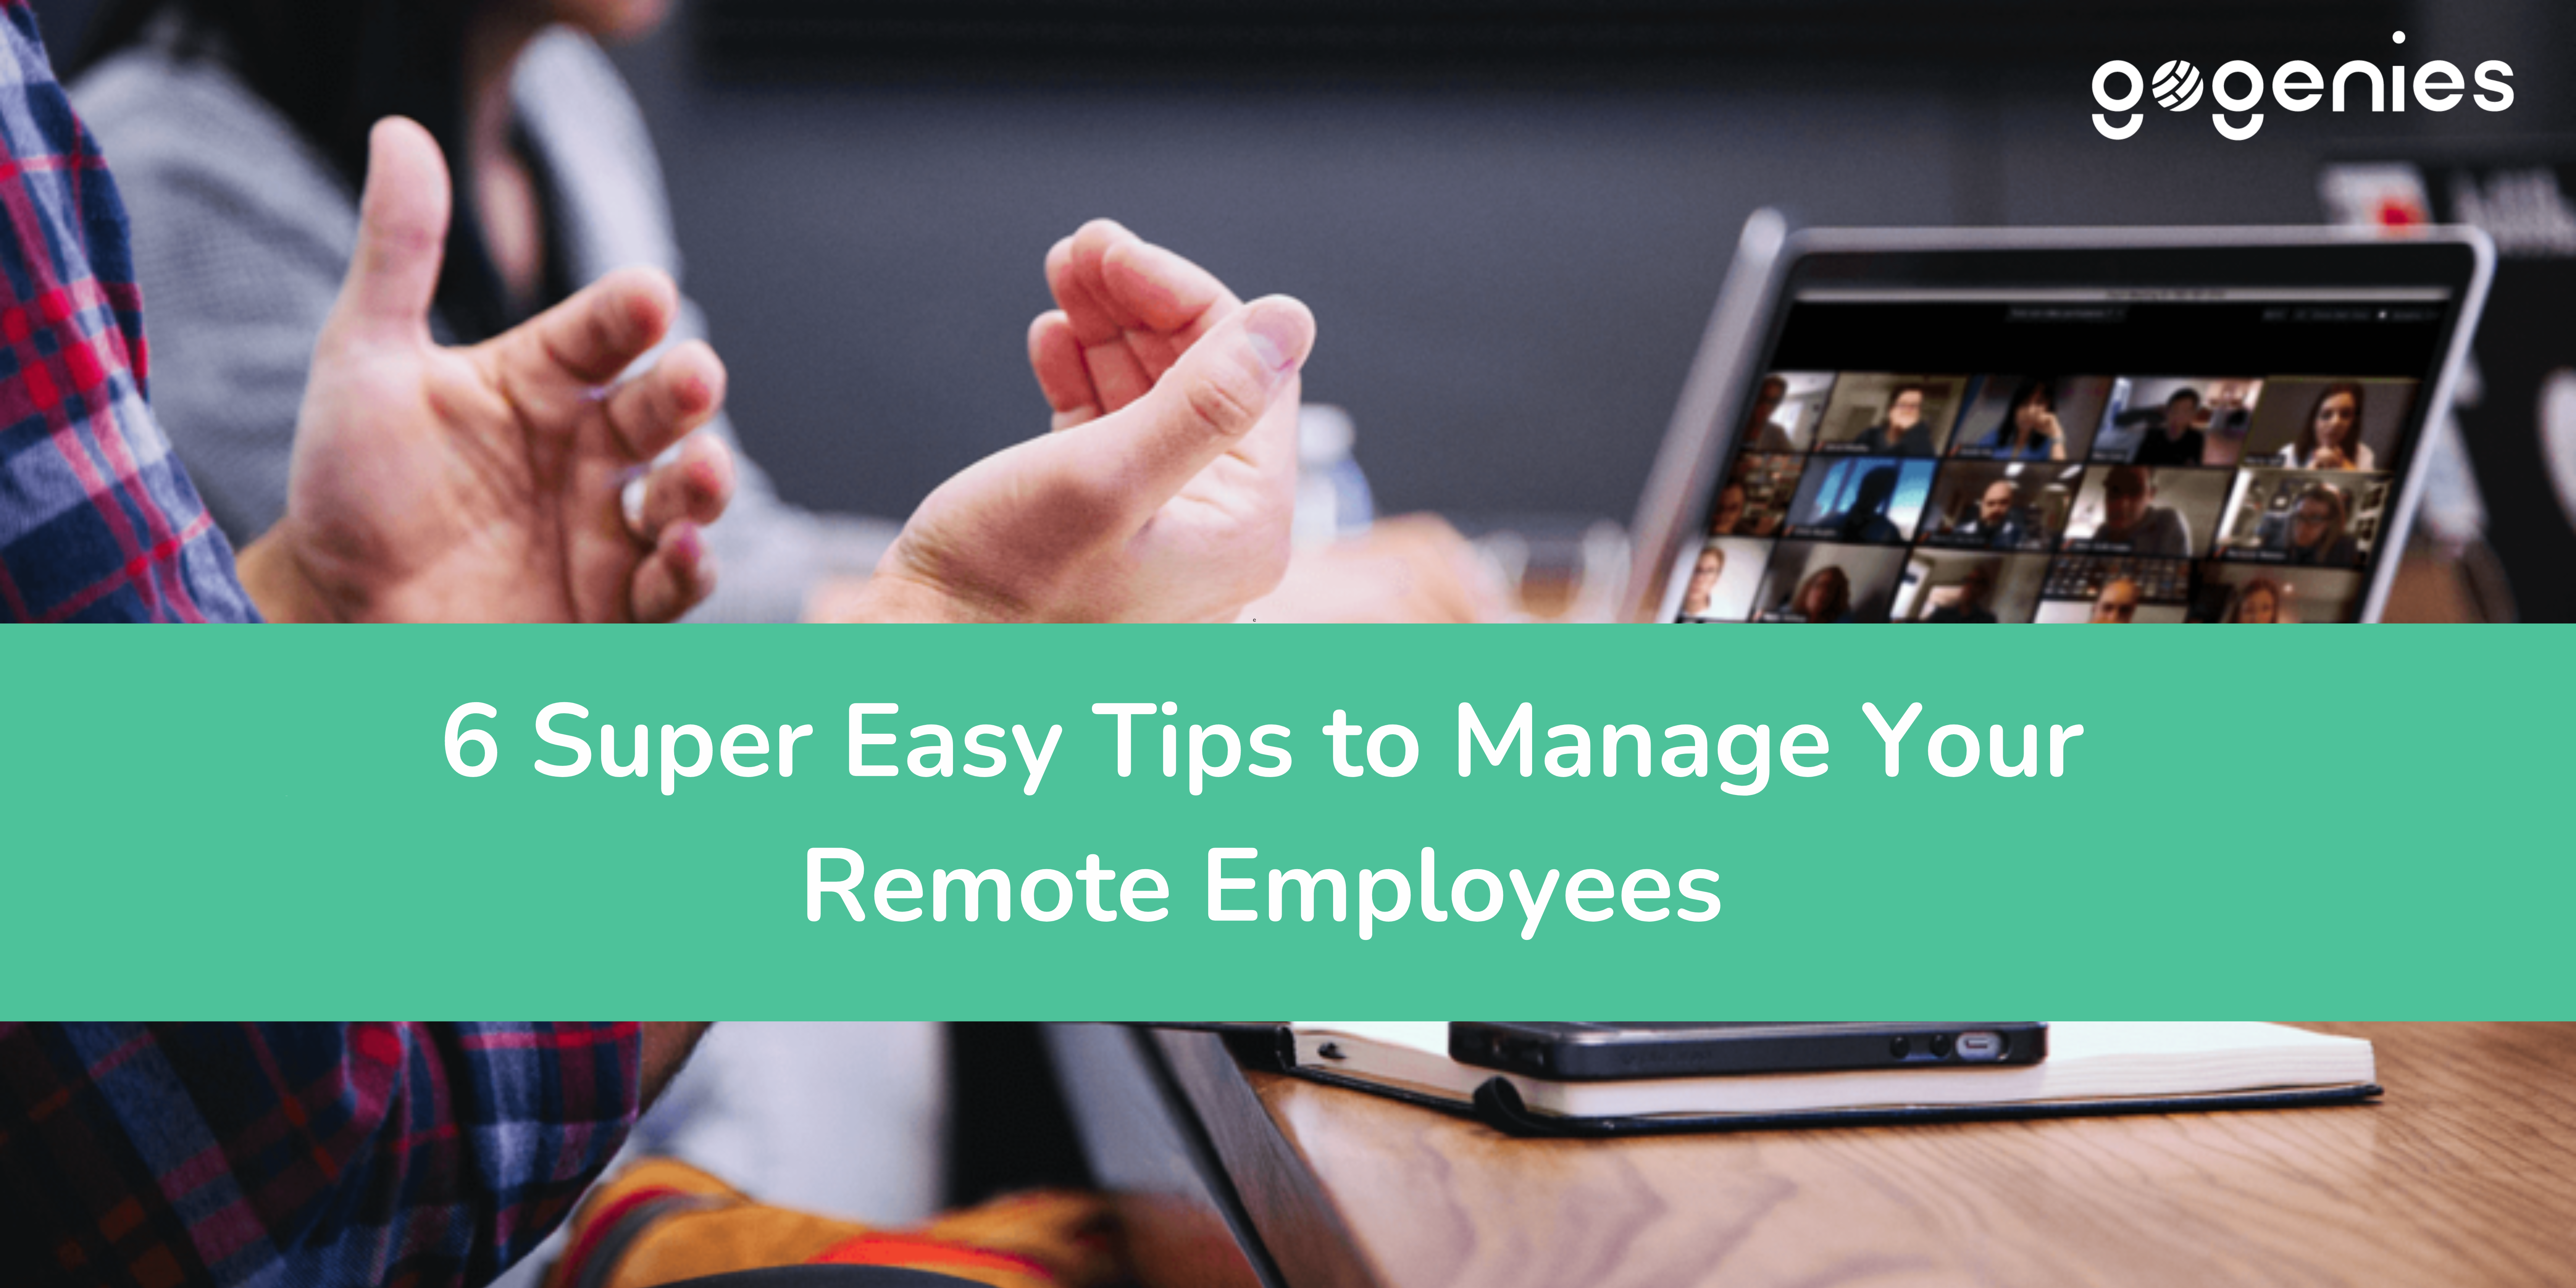 6 Super Easy Tips to Manage Your Remote Employees